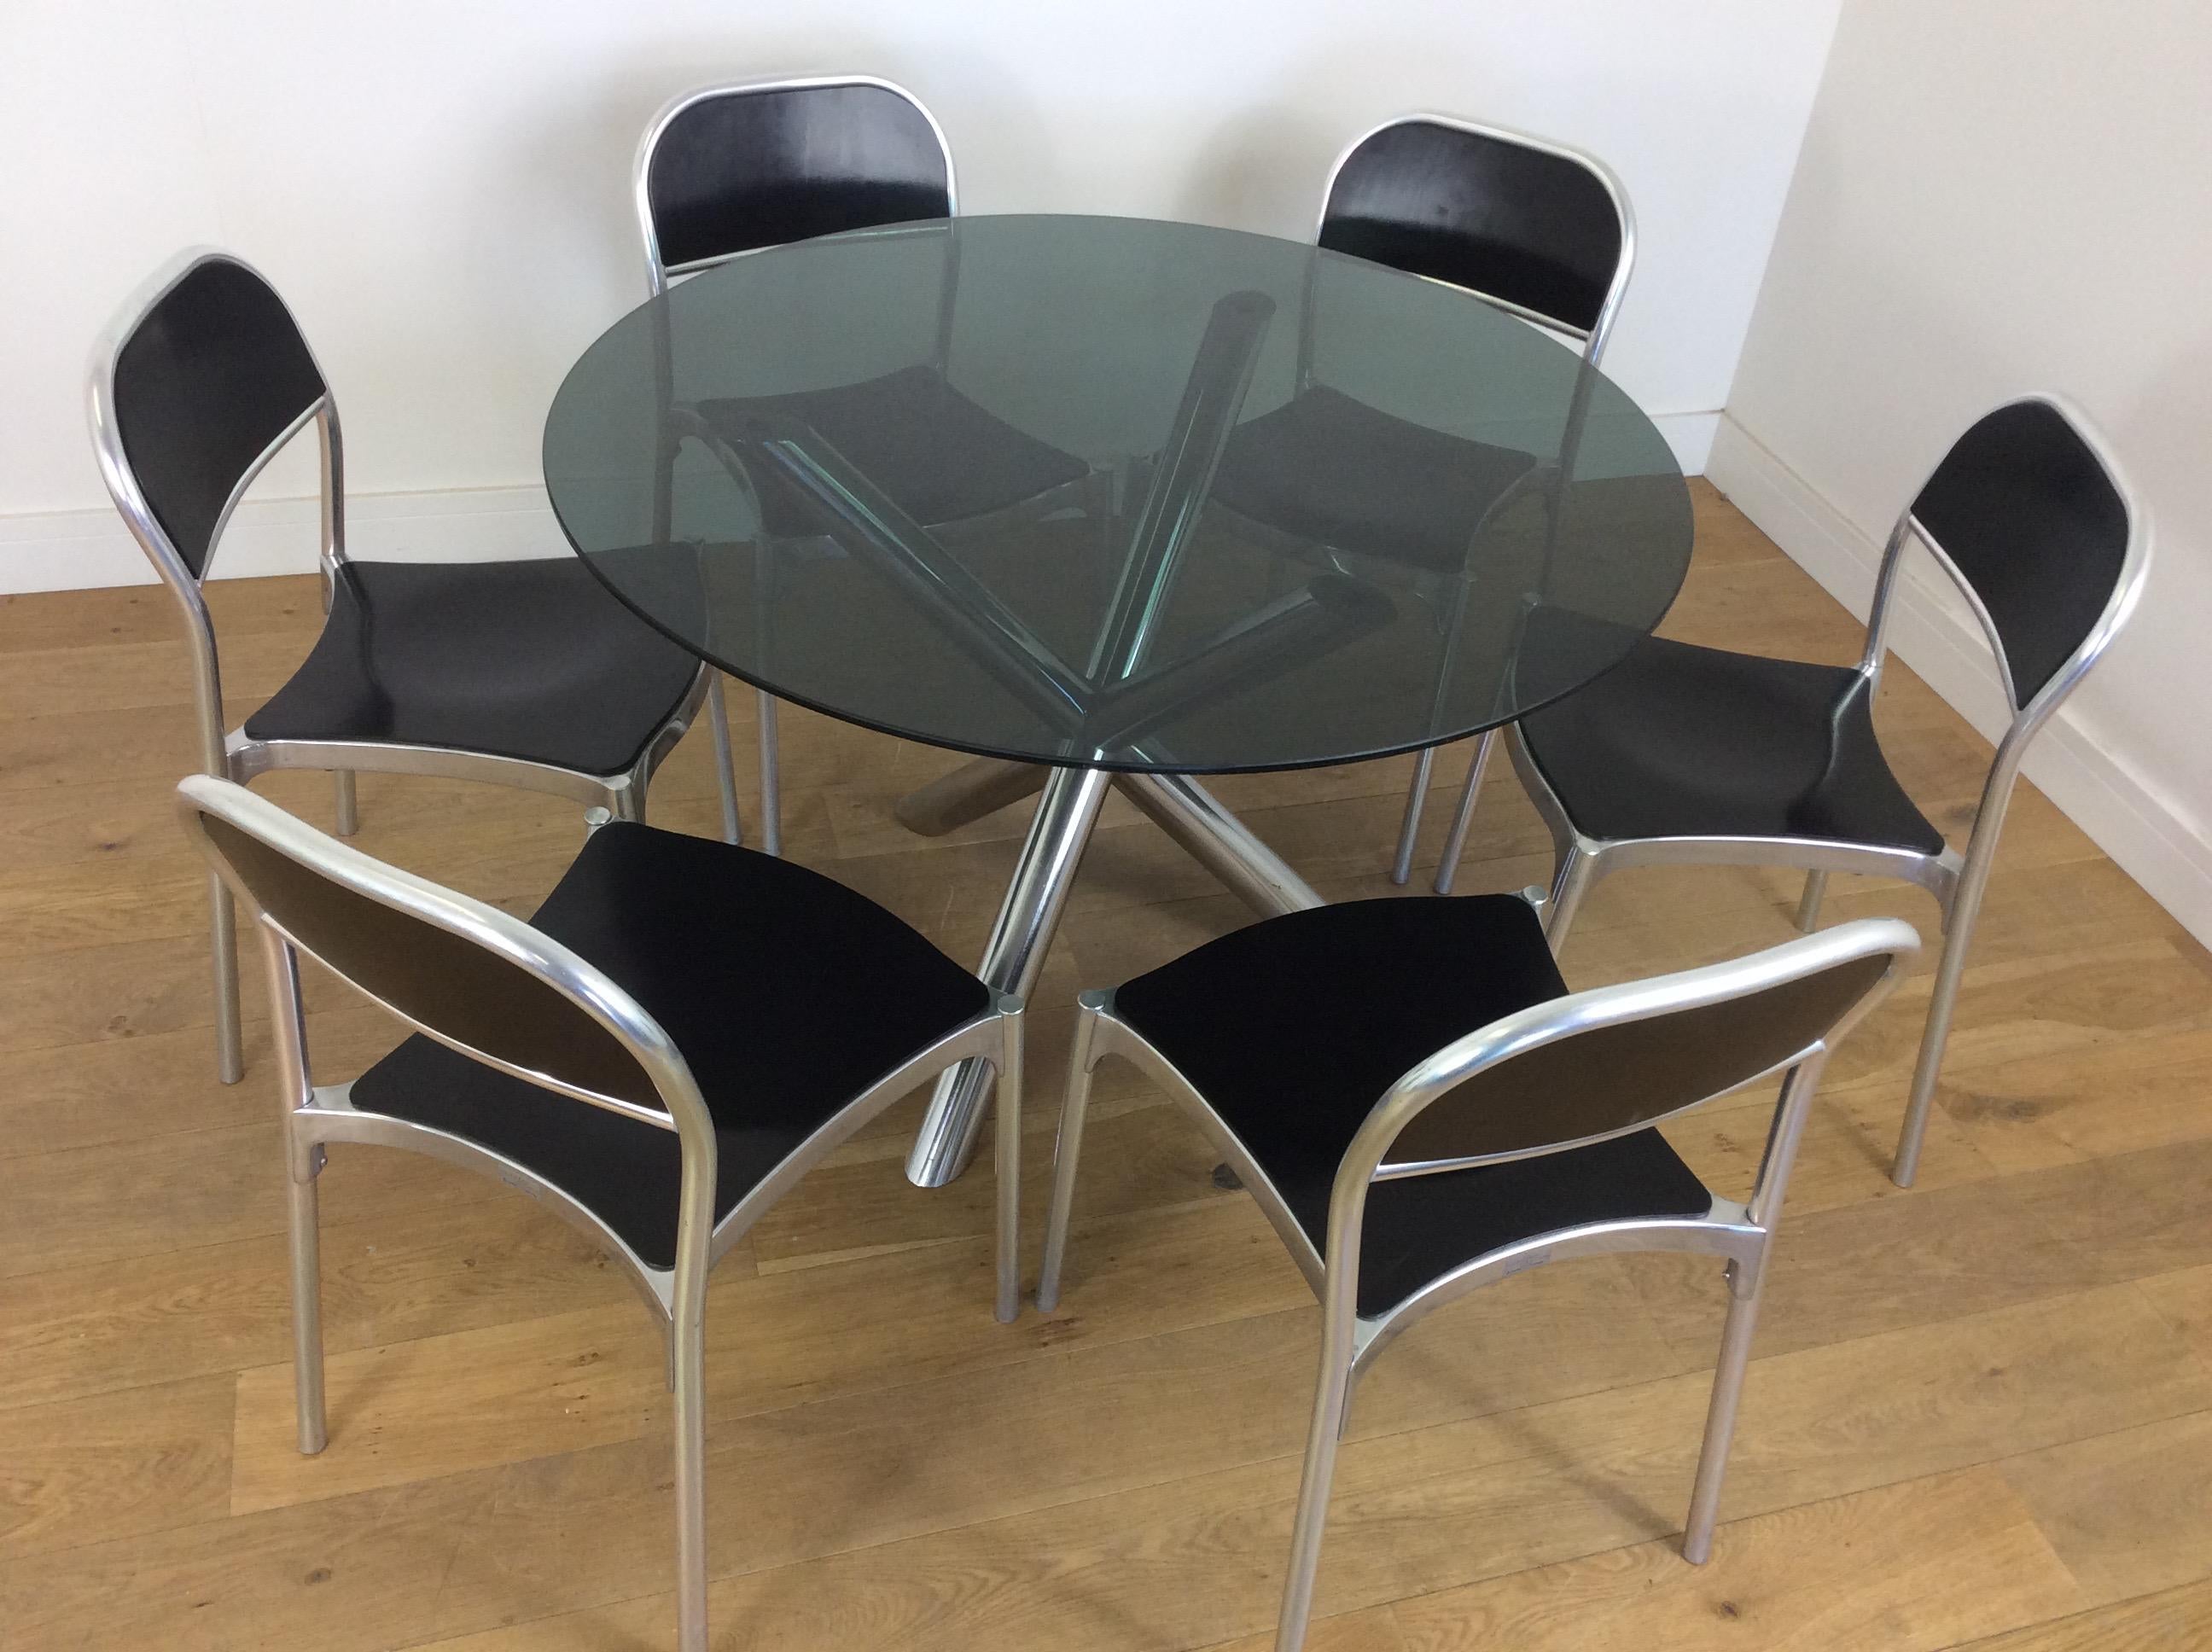 Midcentury chrome table with smoked glass top and six aluminum chairs.
X frame tubular chrome base with thick plate glass top, six aluminium chairs with black painted wood seats and back rest.
the chairs by Metalmobilarredo Sandler